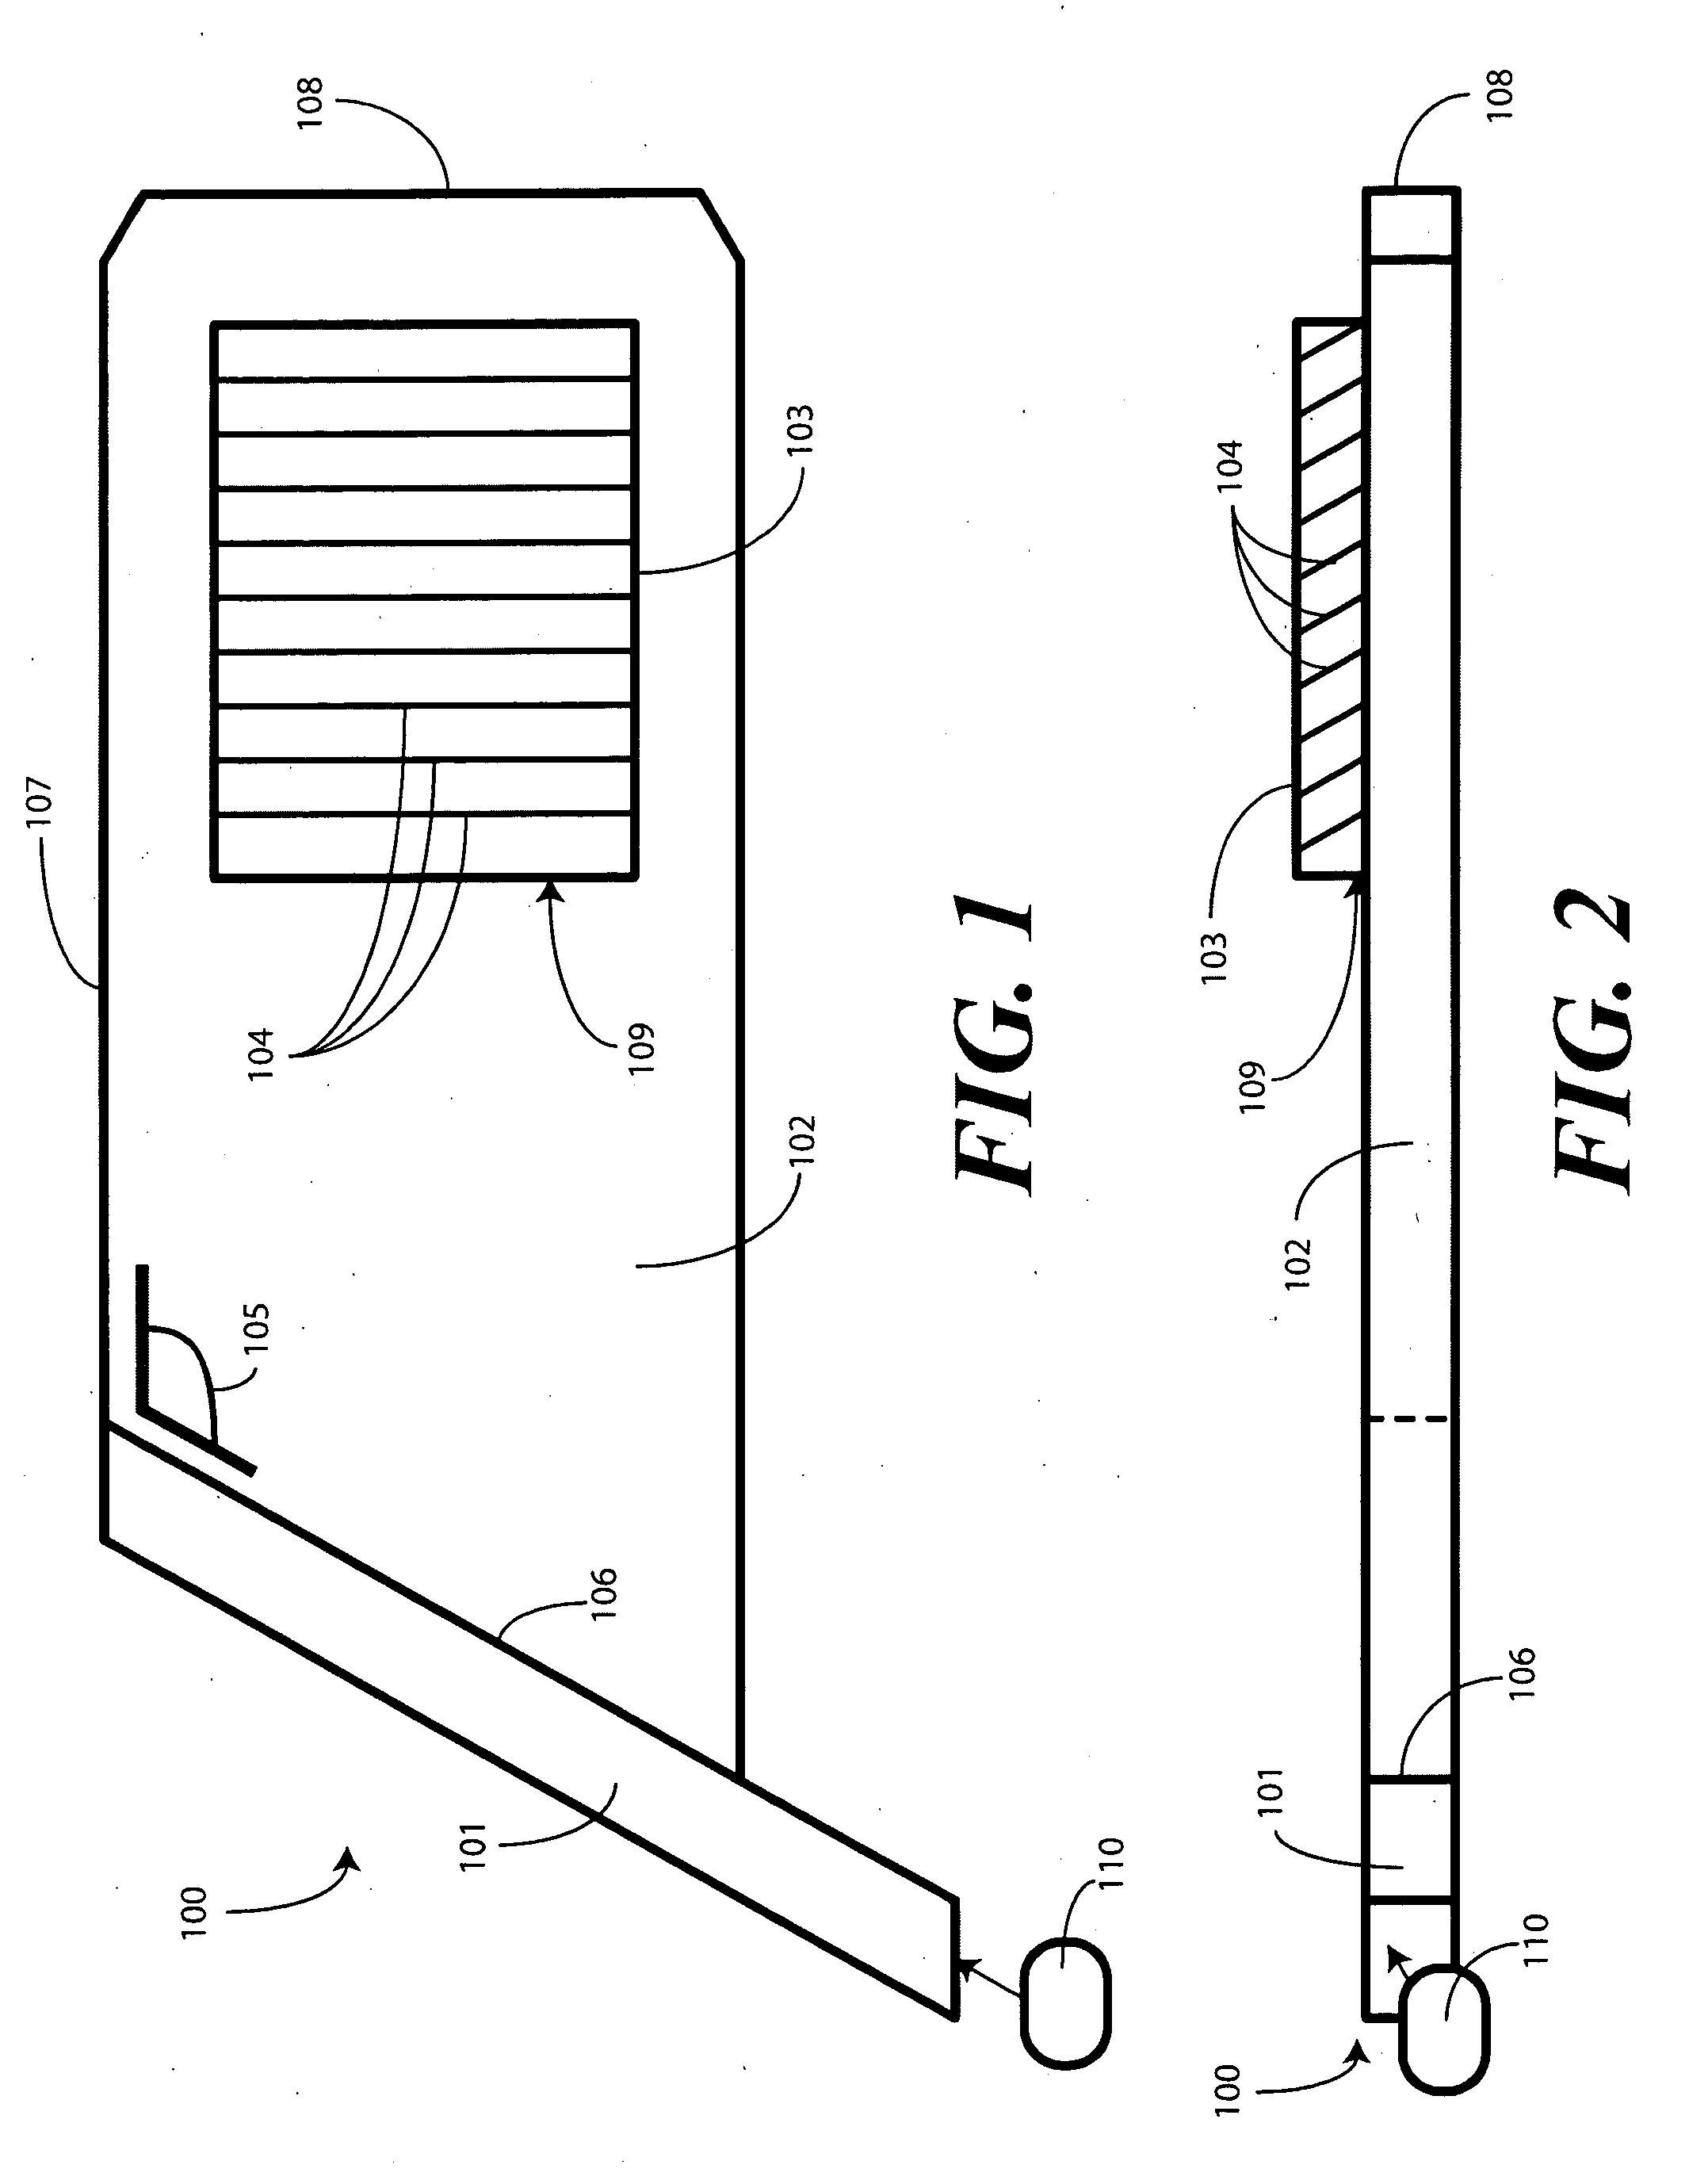 Substrate Guided Relay with Pupil Expanding Input Coupler